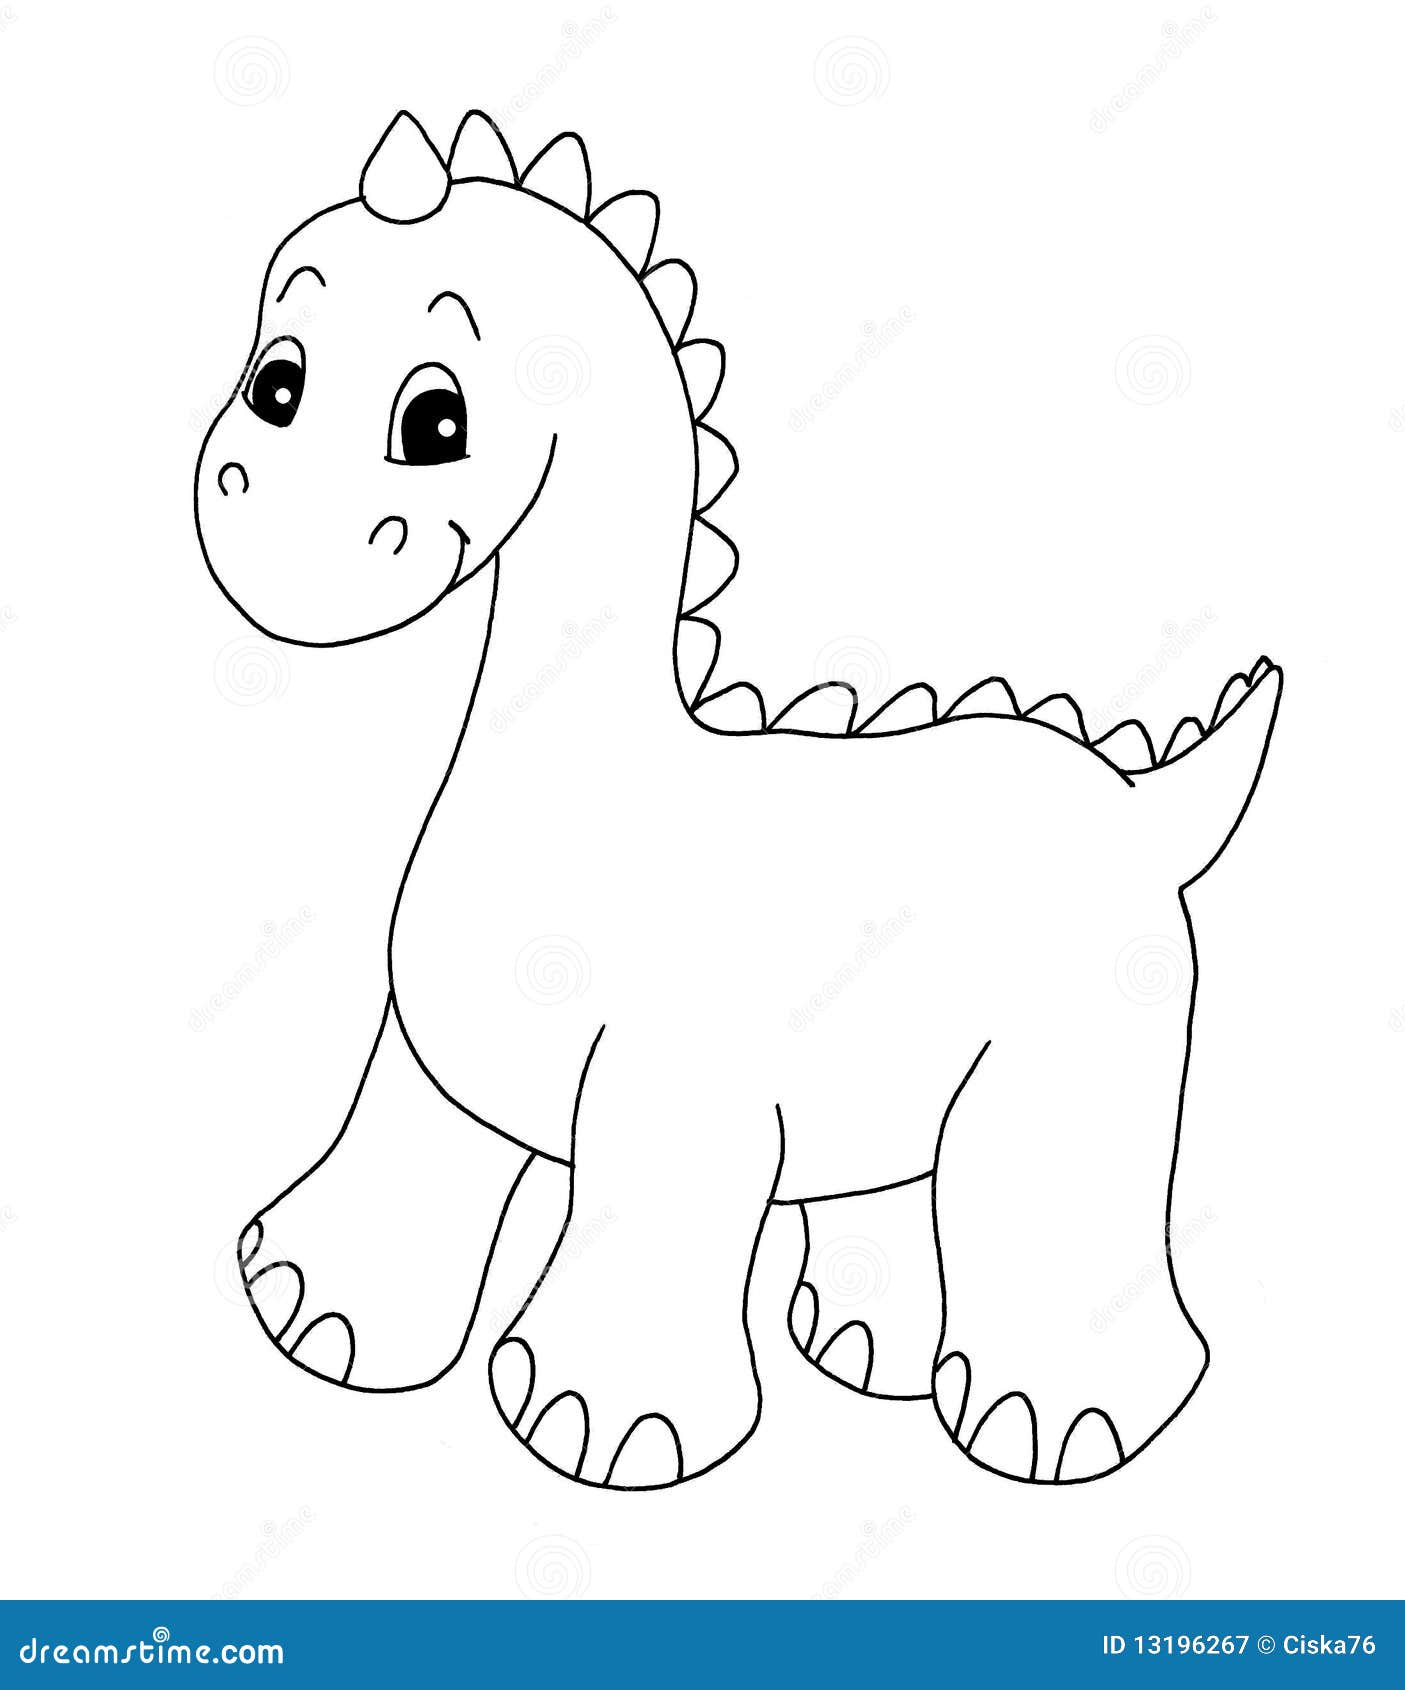 free black and white clipart of dinosaurs - photo #30